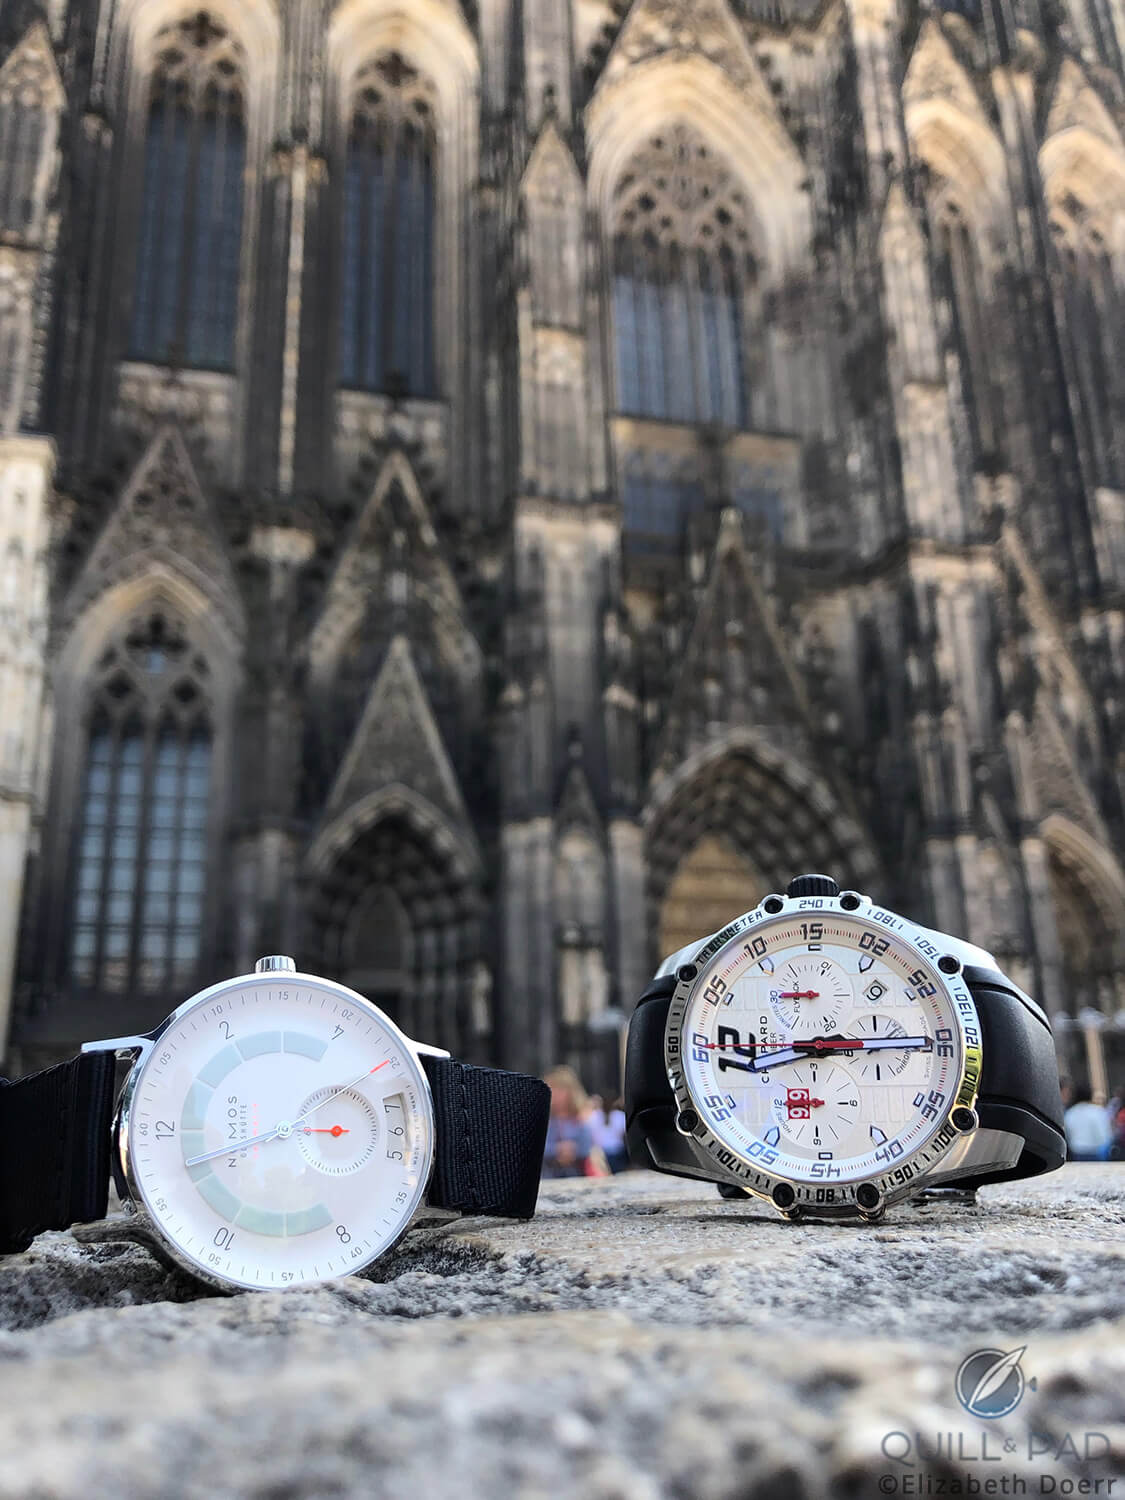 Nomos Glashütte Autobahn and Chopard Superfast Chrono Porsche 919 Edition in front of the Cologne Cathedral